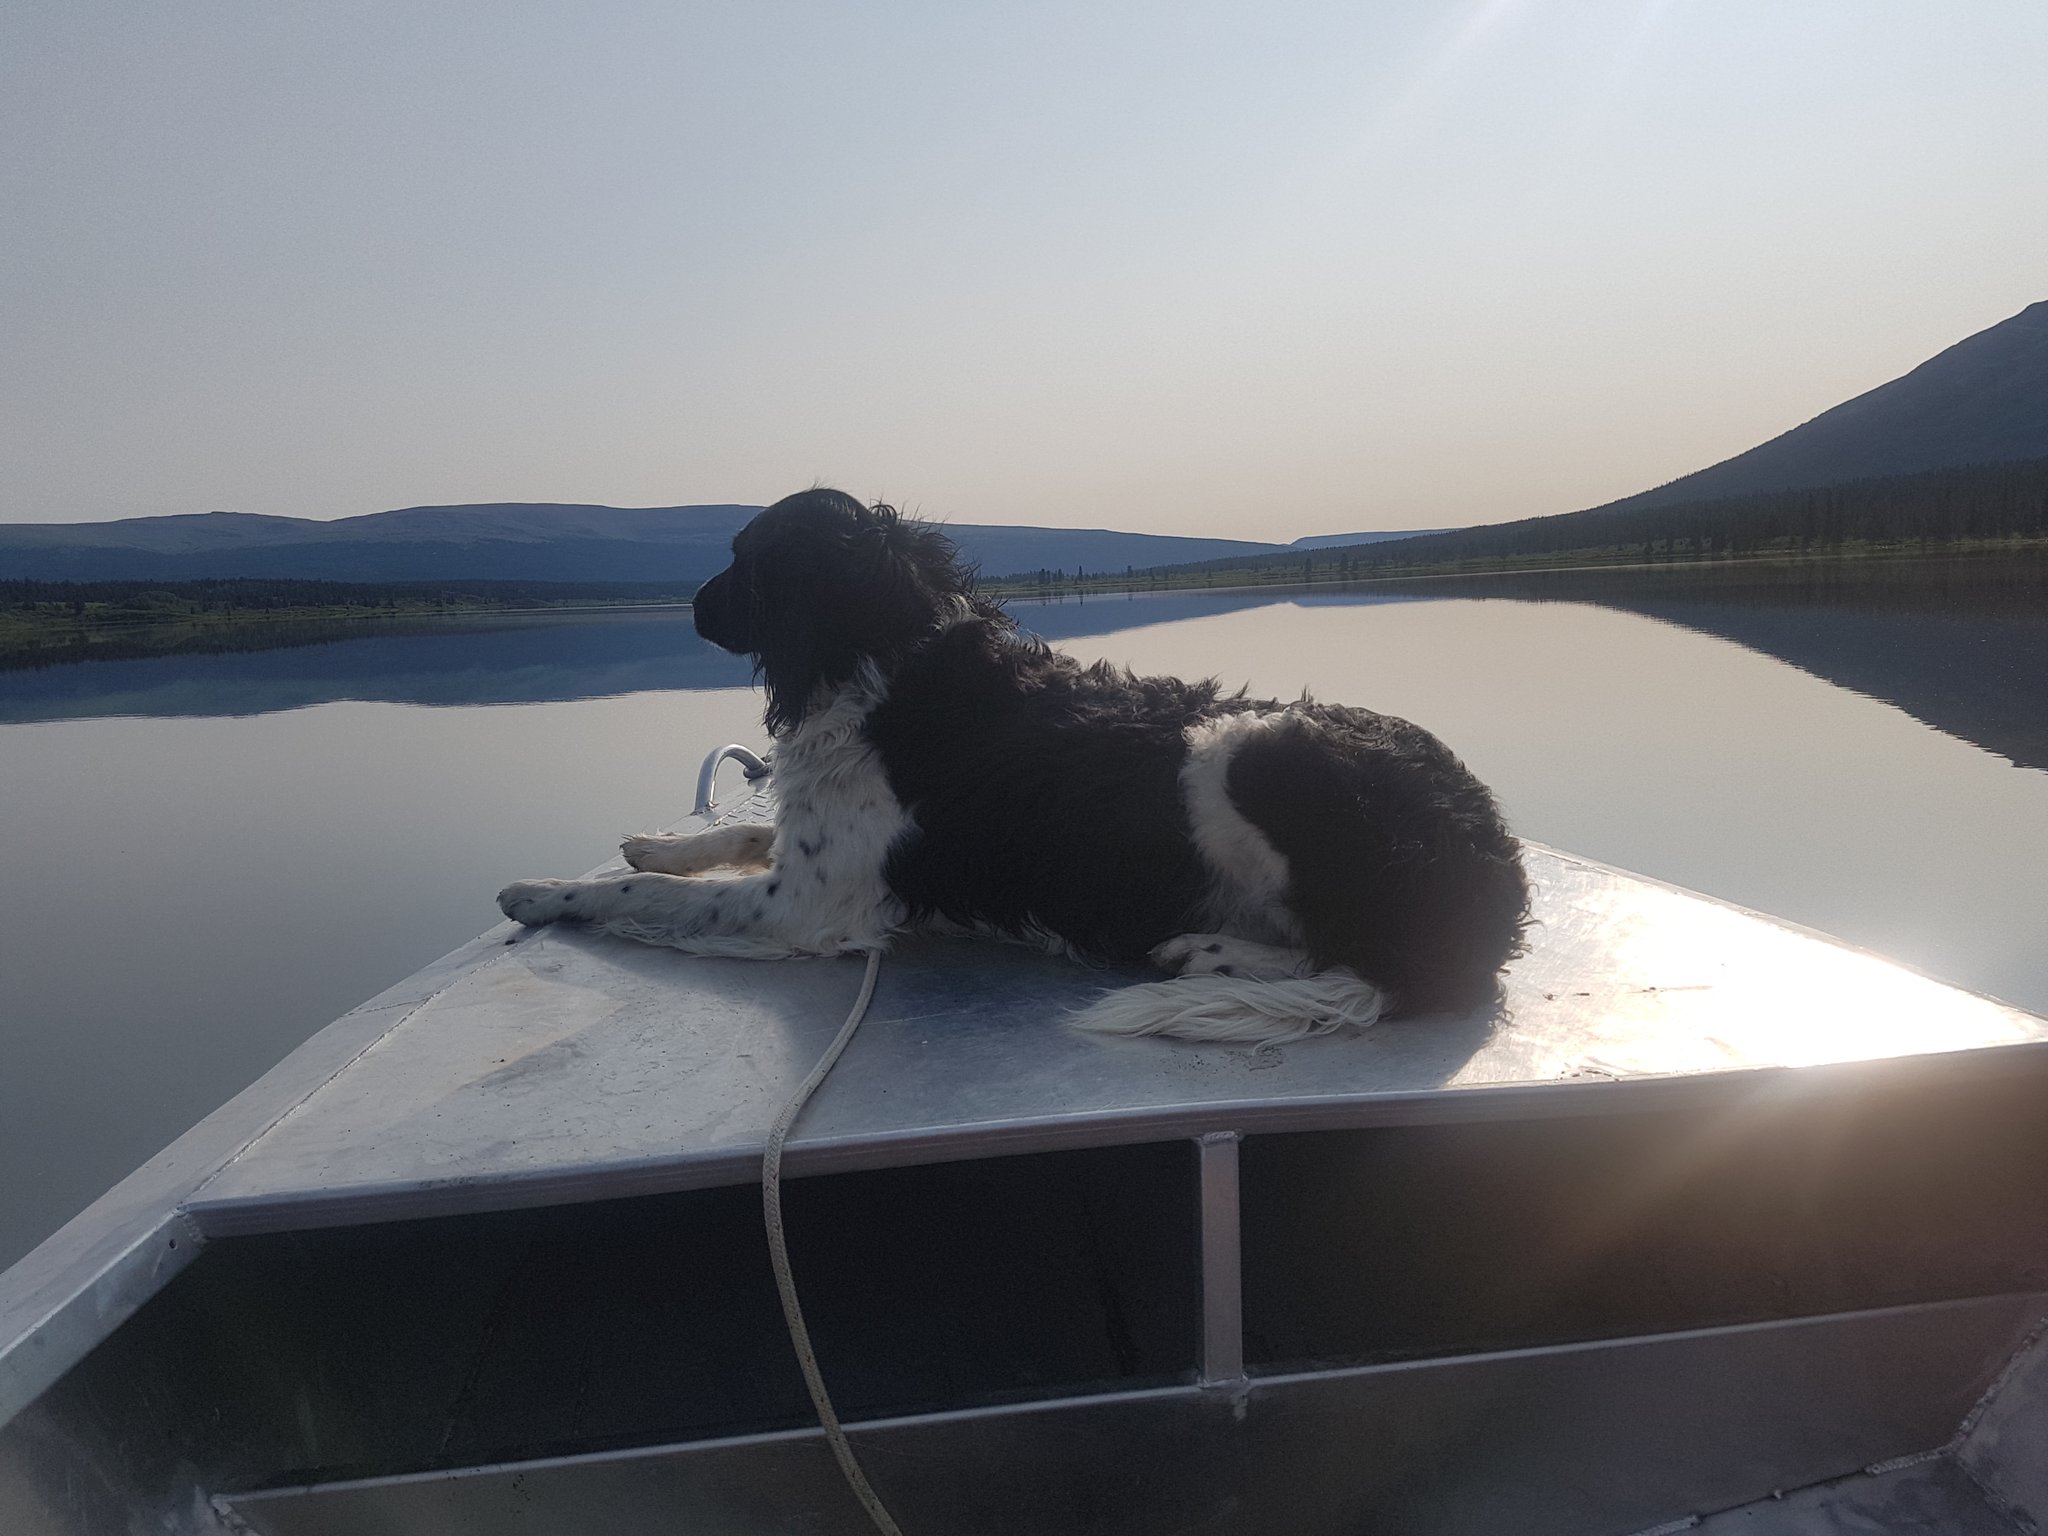 Setting out early morning at Spatsizi to chase Artic Grayling with Abby the Munsterlander in charge.